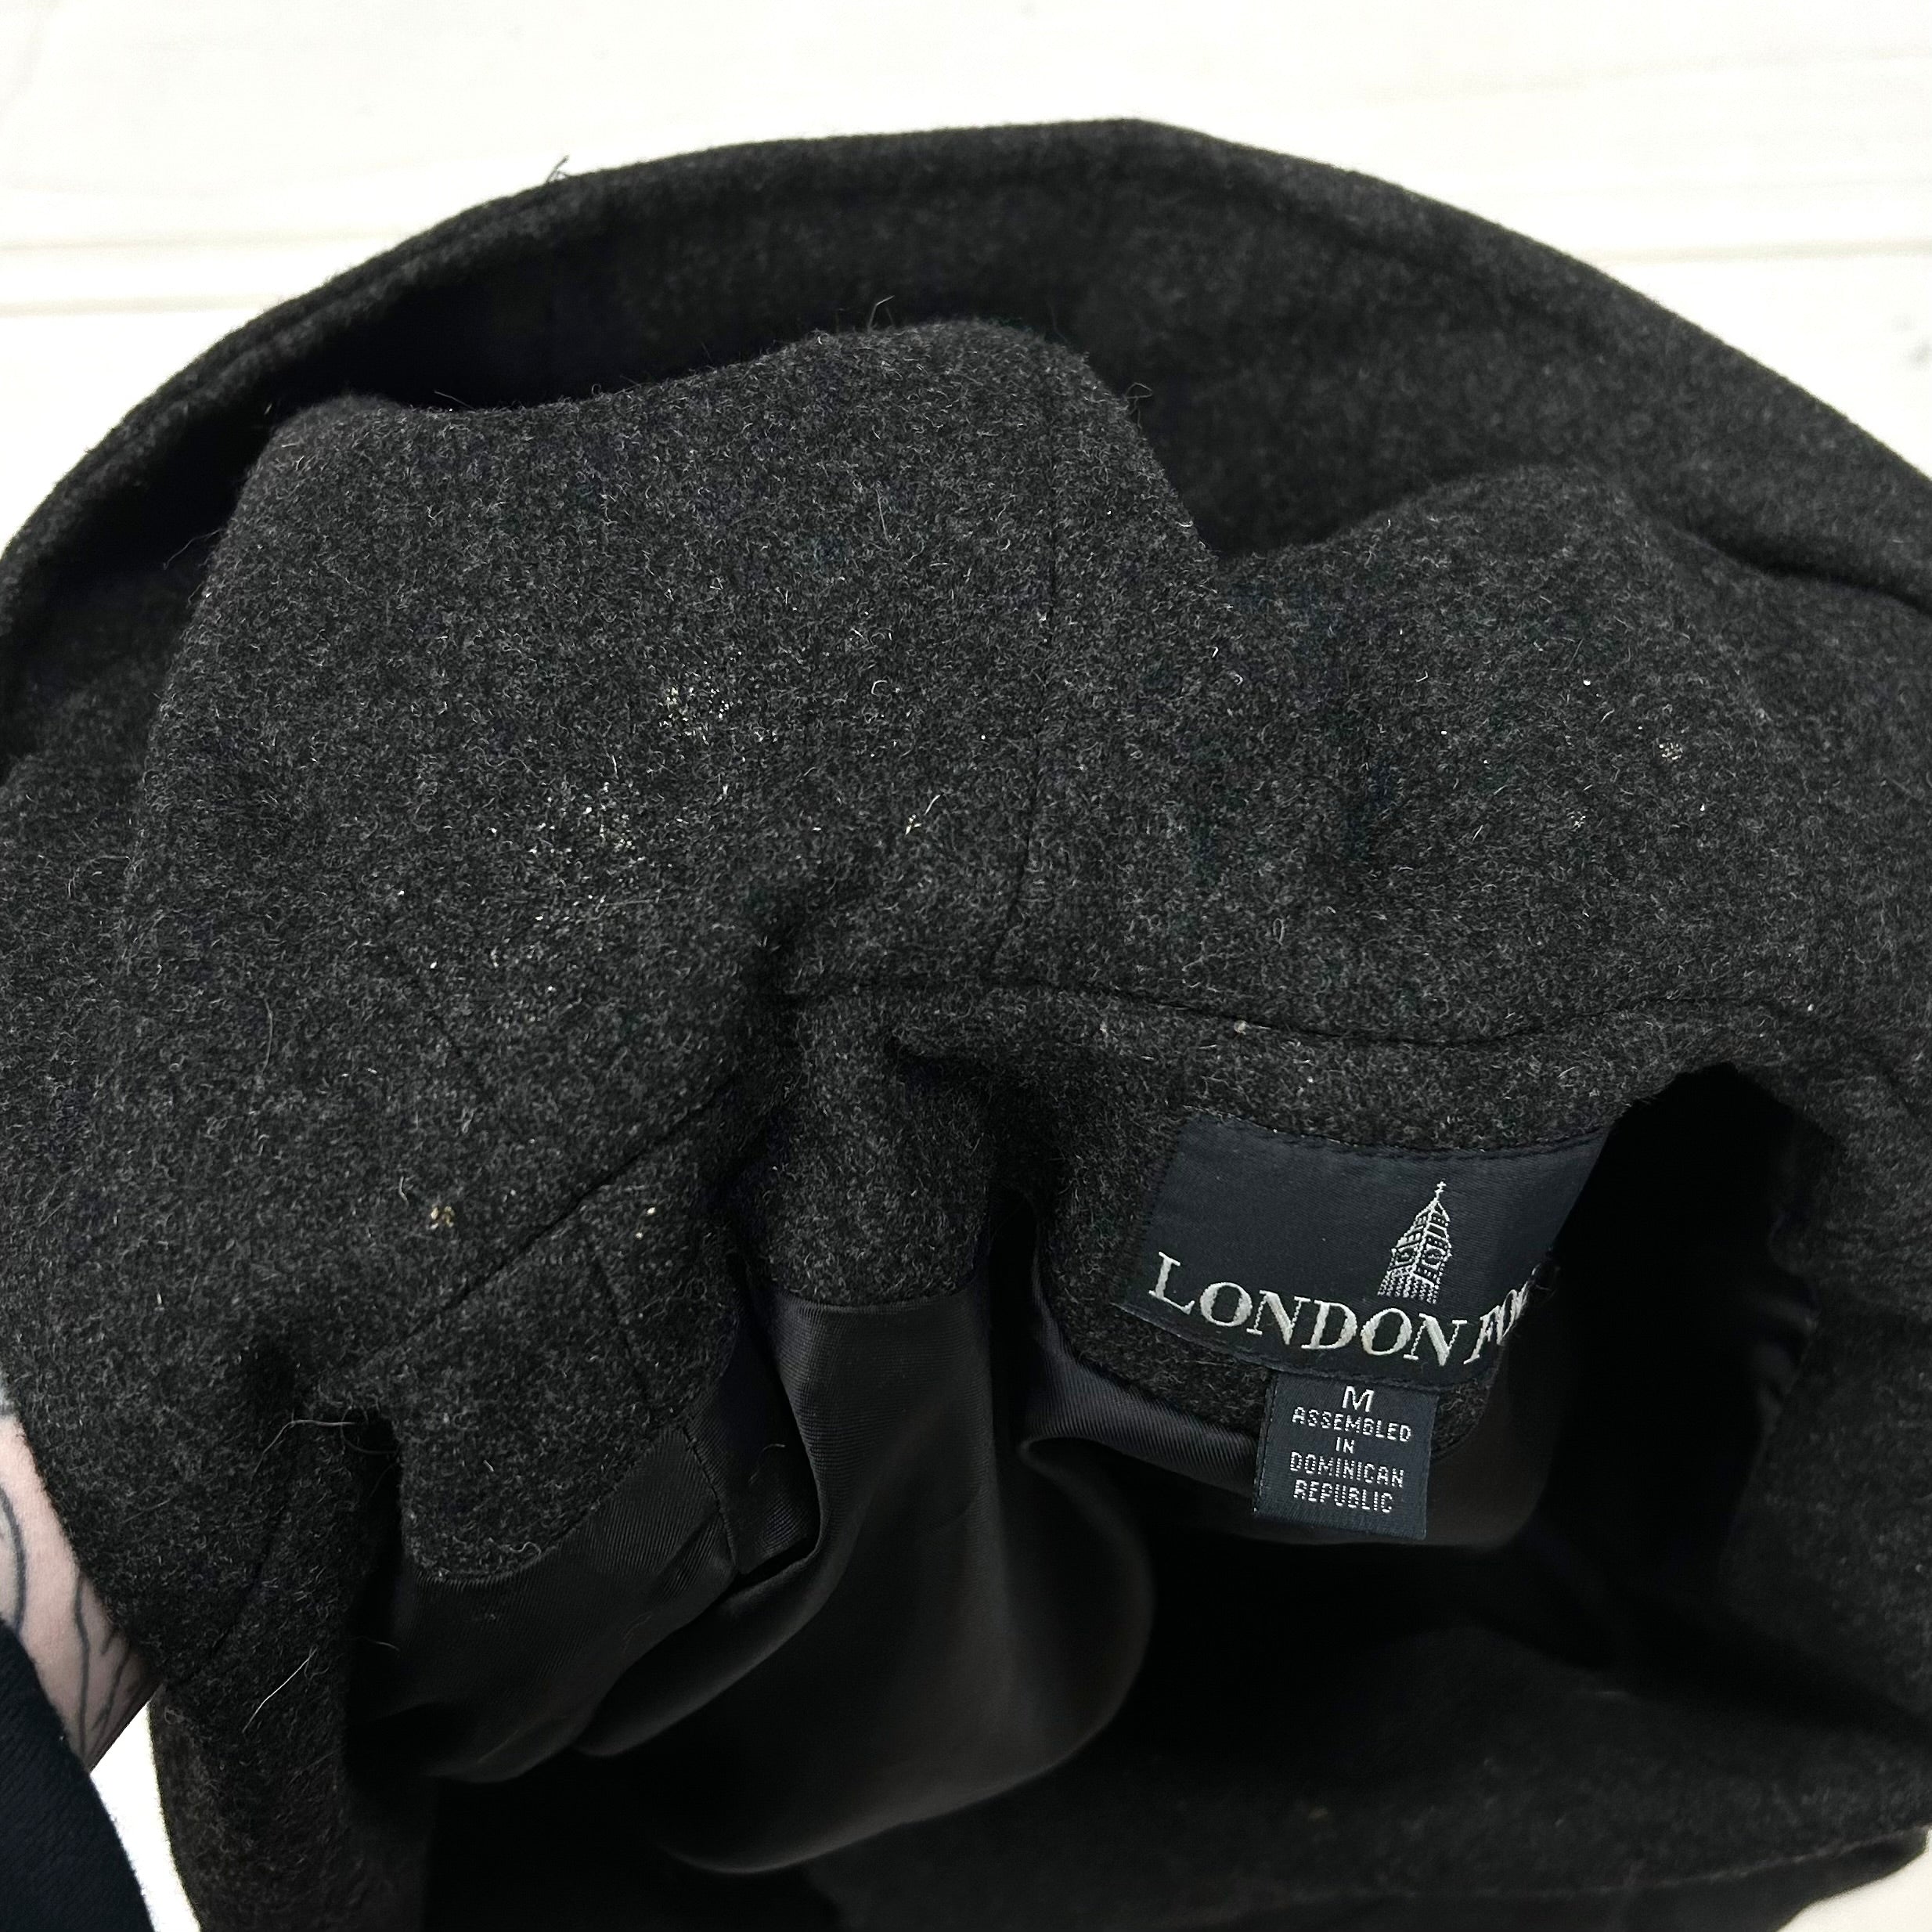 Coat Peacoat By London Fog Size: M – Clothes Mentor West Chester